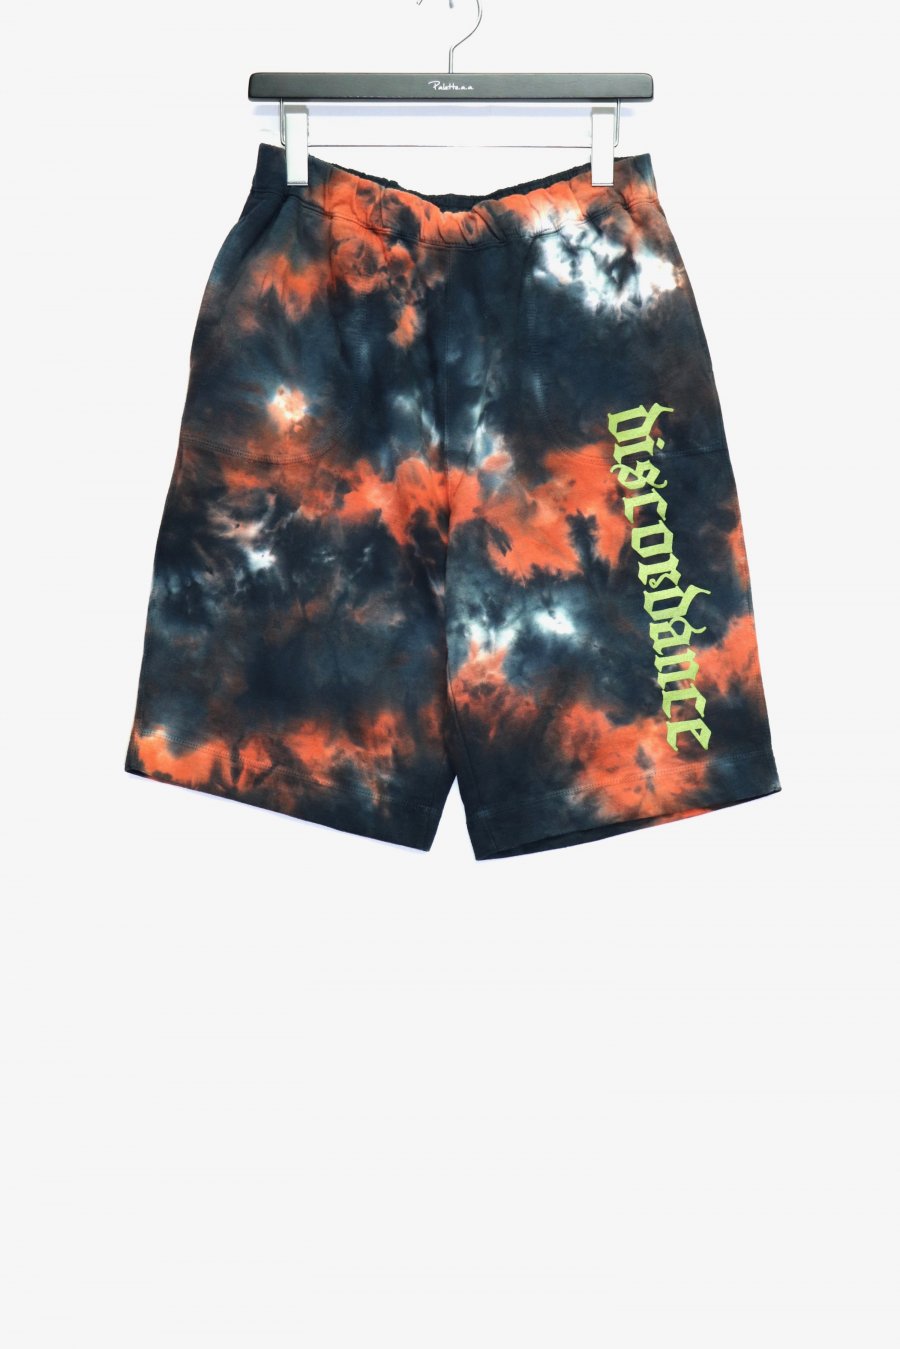 Children of the discordance  HAND DYEING & LOGO PRINT SHORTSFIRE<img class='new_mark_img2' src='https://img.shop-pro.jp/img/new/icons15.gif' style='border:none;display:inline;margin:0px;padding:0px;width:auto;' />